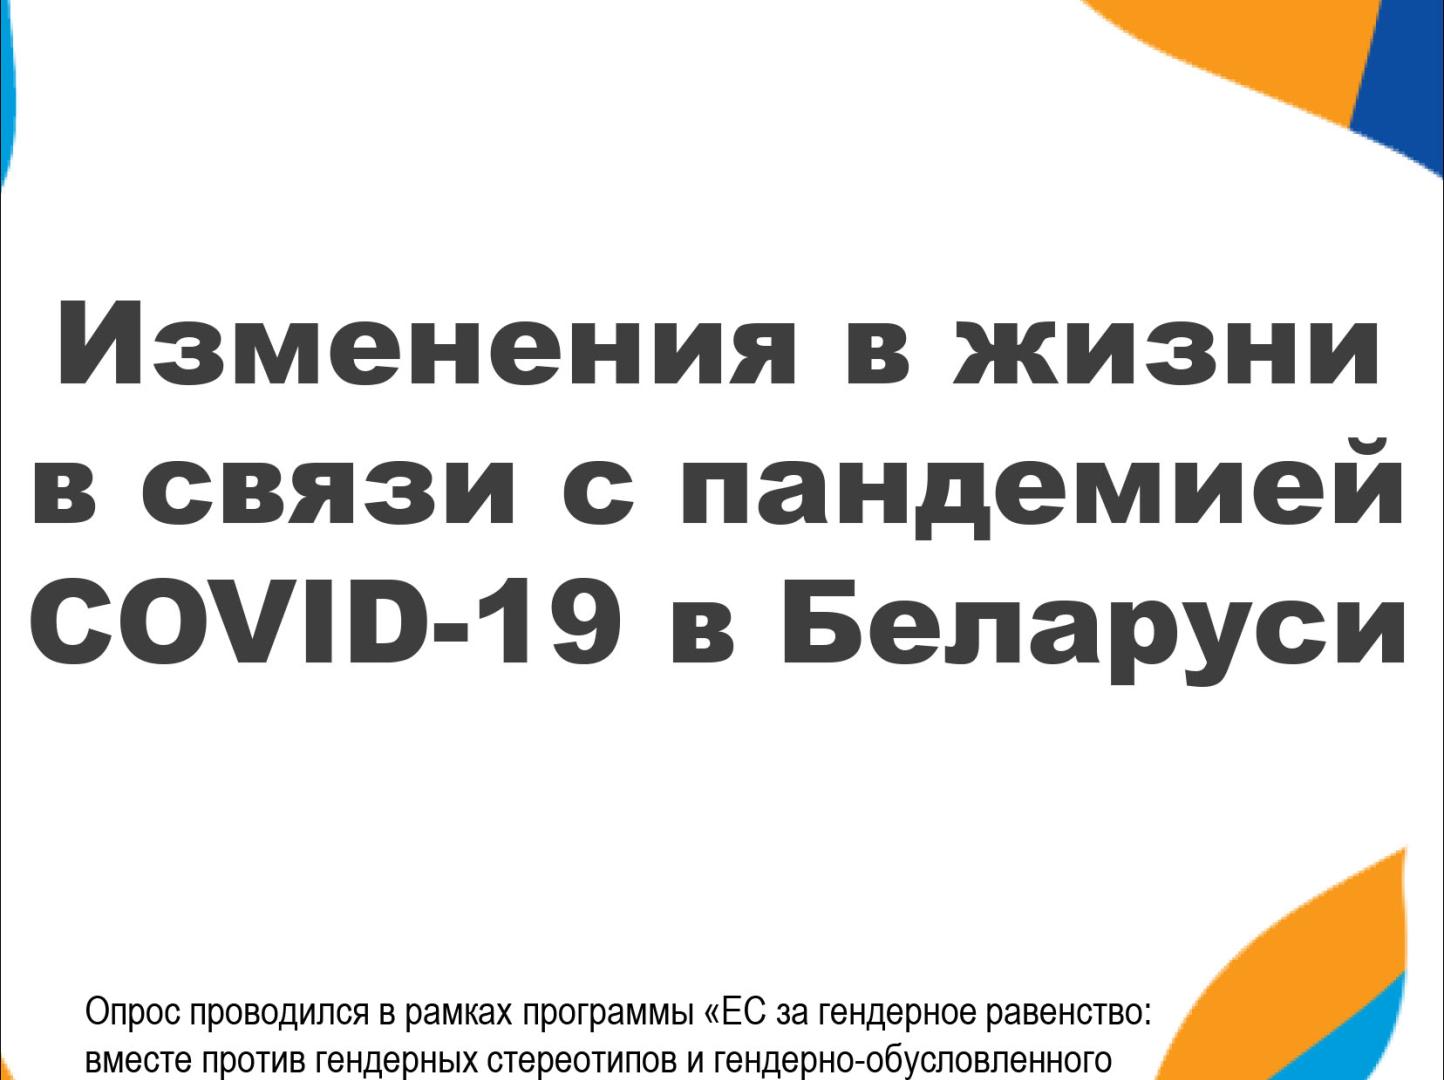 Survey "Changes in life in connection with the COVID-19 pandemic in Belarus"